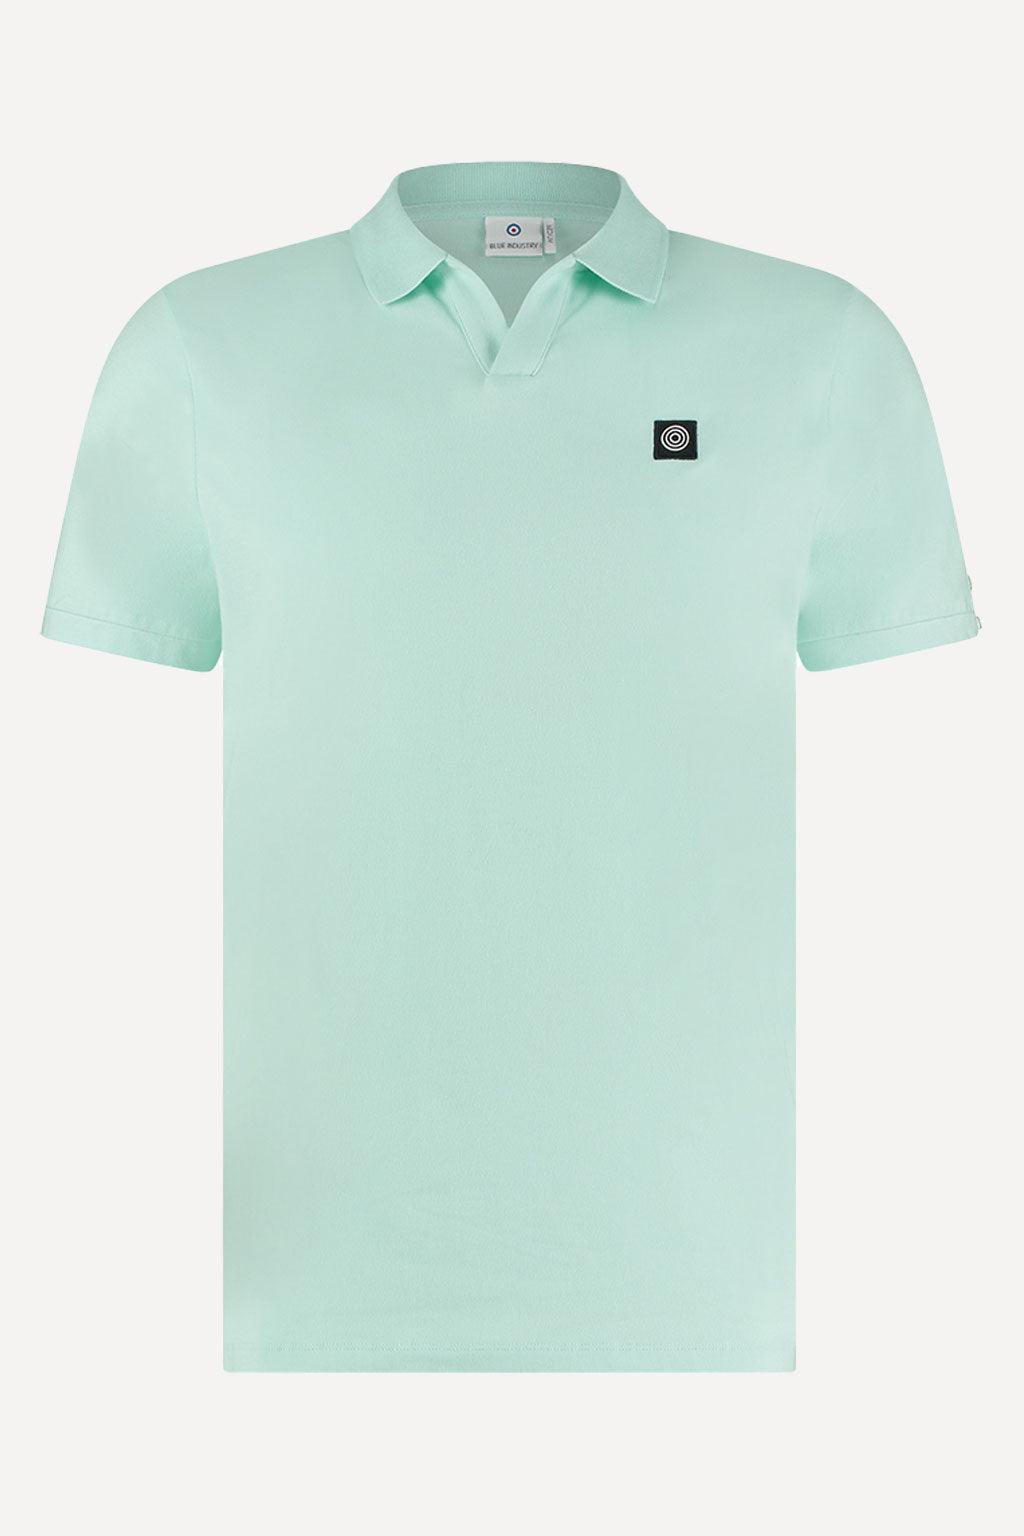 Blue Industry polo